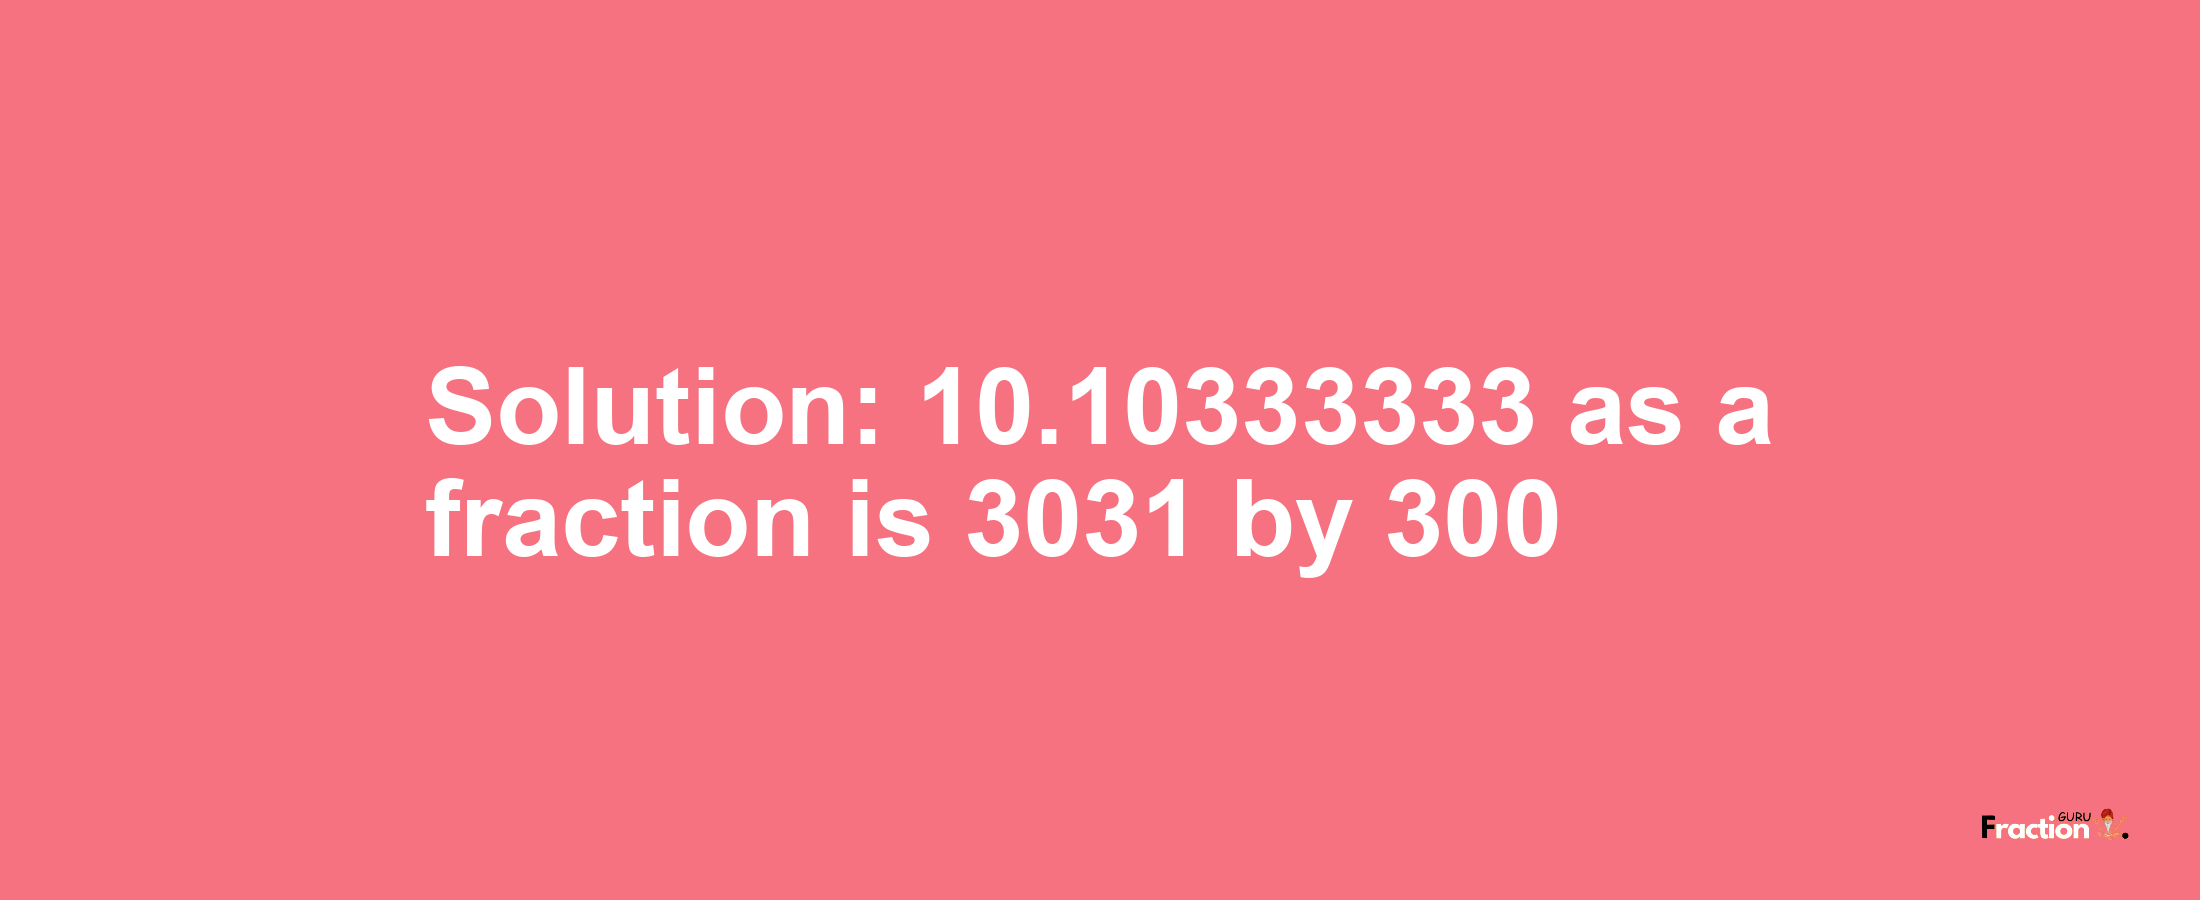 Solution:10.10333333 as a fraction is 3031/300